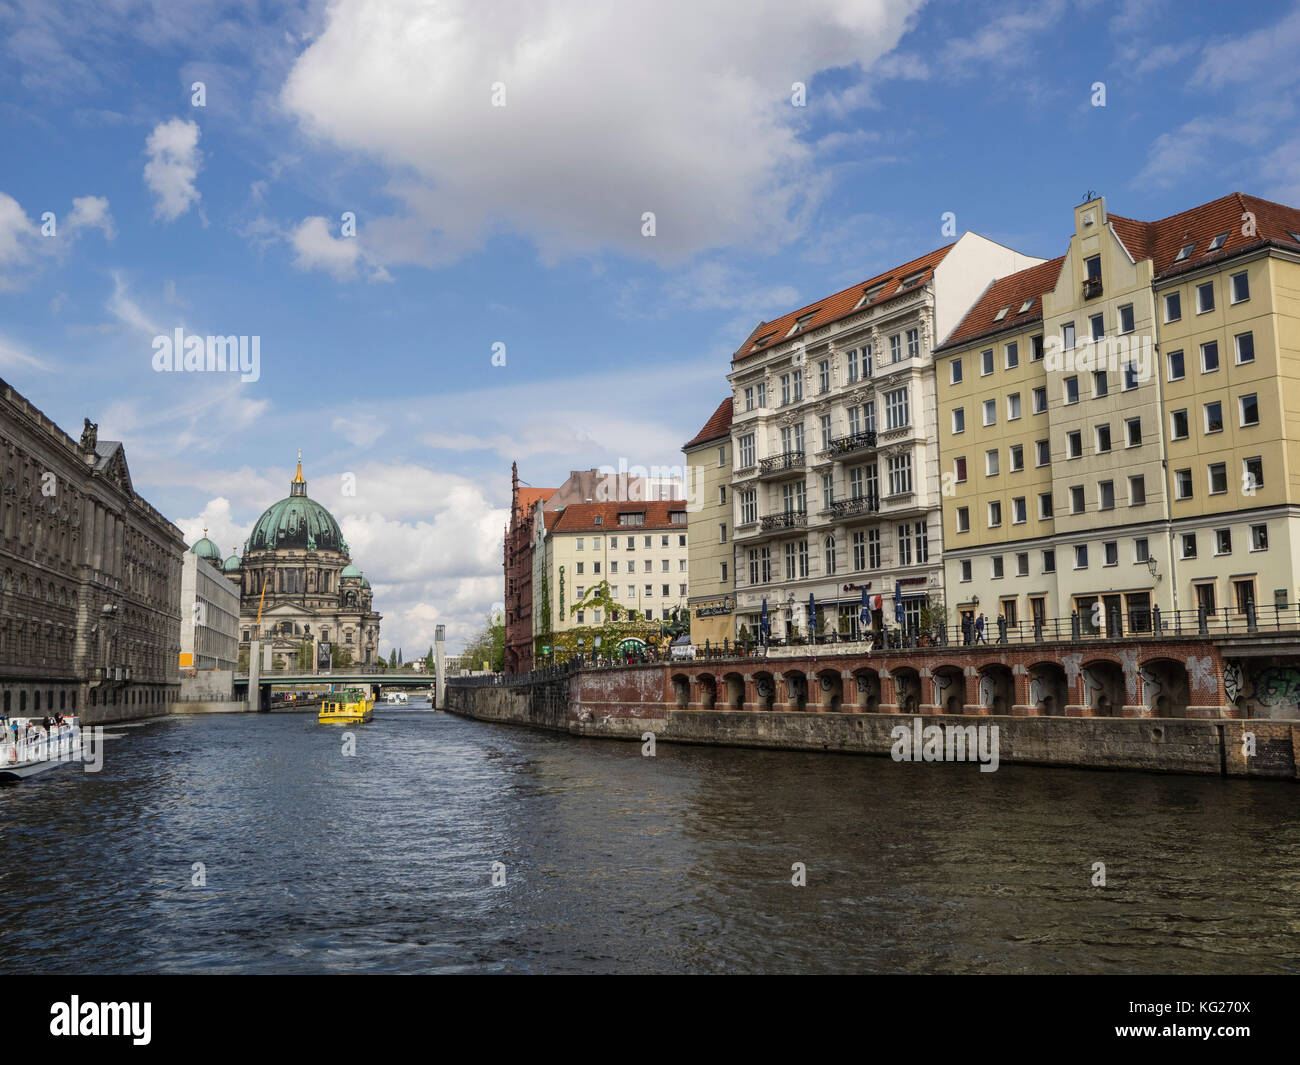 View towards the Cathedral from the River Spree, Berlin, Germany, Europe Stock Photo